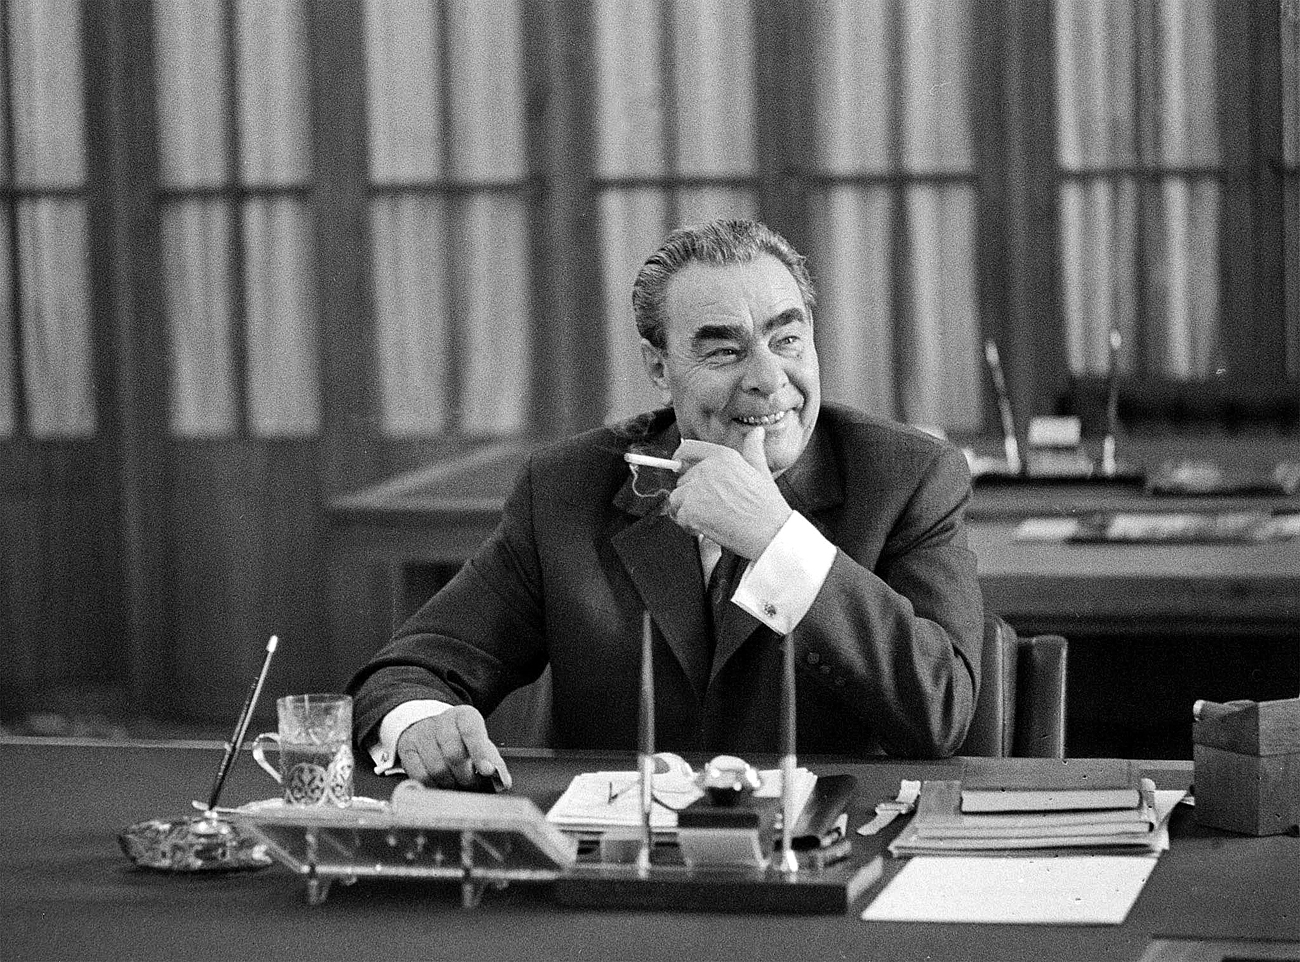 Even though Soviet citizens could get in trouble with the authorities for telling political jokes, during the Era of Stagnation, as the Brezhnev period was known, many people made fun of the all-seeing Communist Party and its leader. Photo: Leonid Brezhnev in his study in the Kremlin, Moscow.